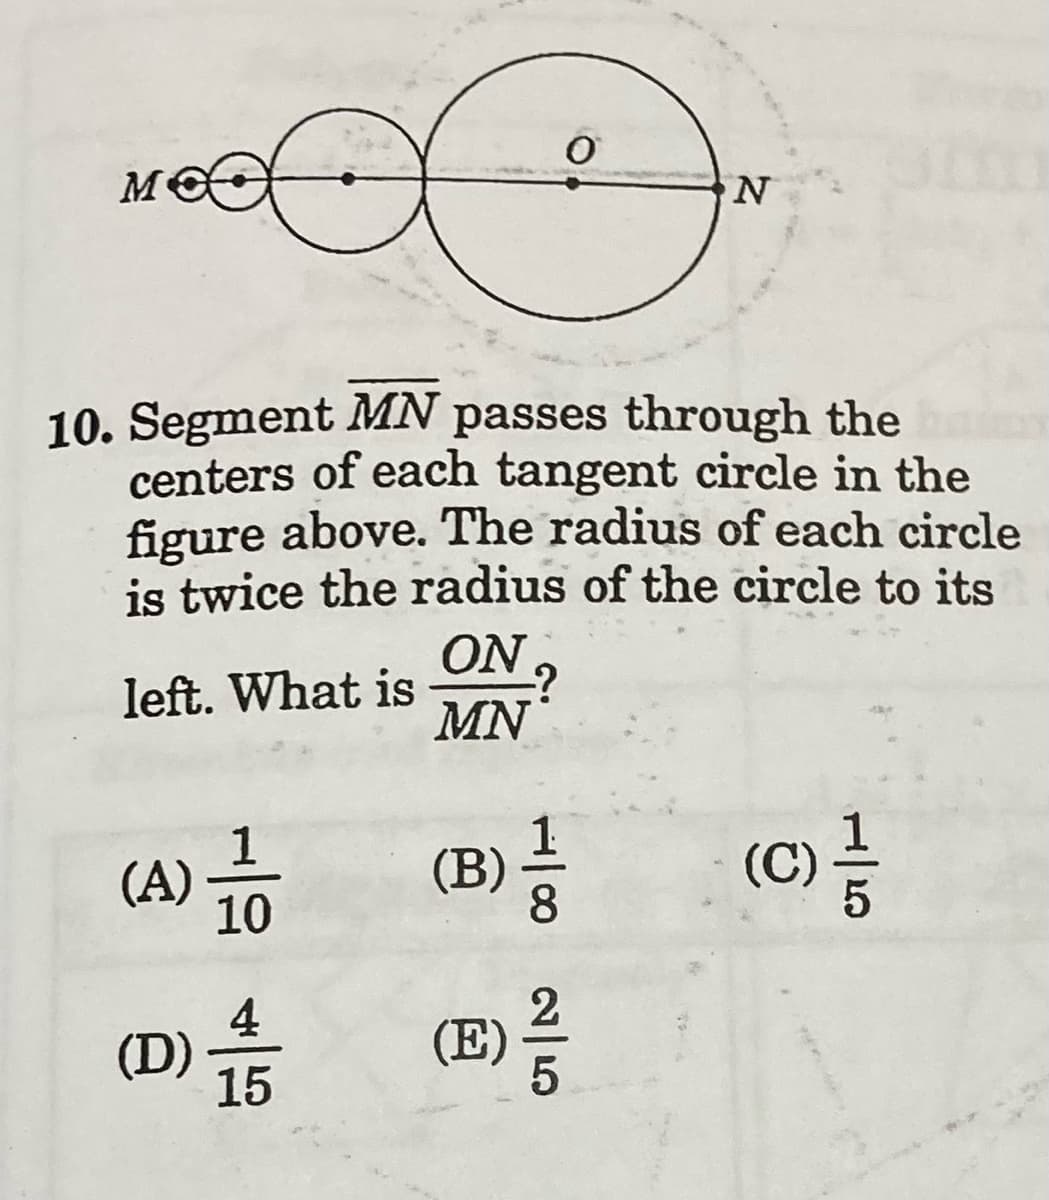 м
10. Segment MN passes through the
centers of each tangent circle in the
figure above. The radius of each circle
is twice the radius of the circle to its
ON
left. What is
MN
(A)
10
(B)
8.
(C)
4
(D)
15
(E)
